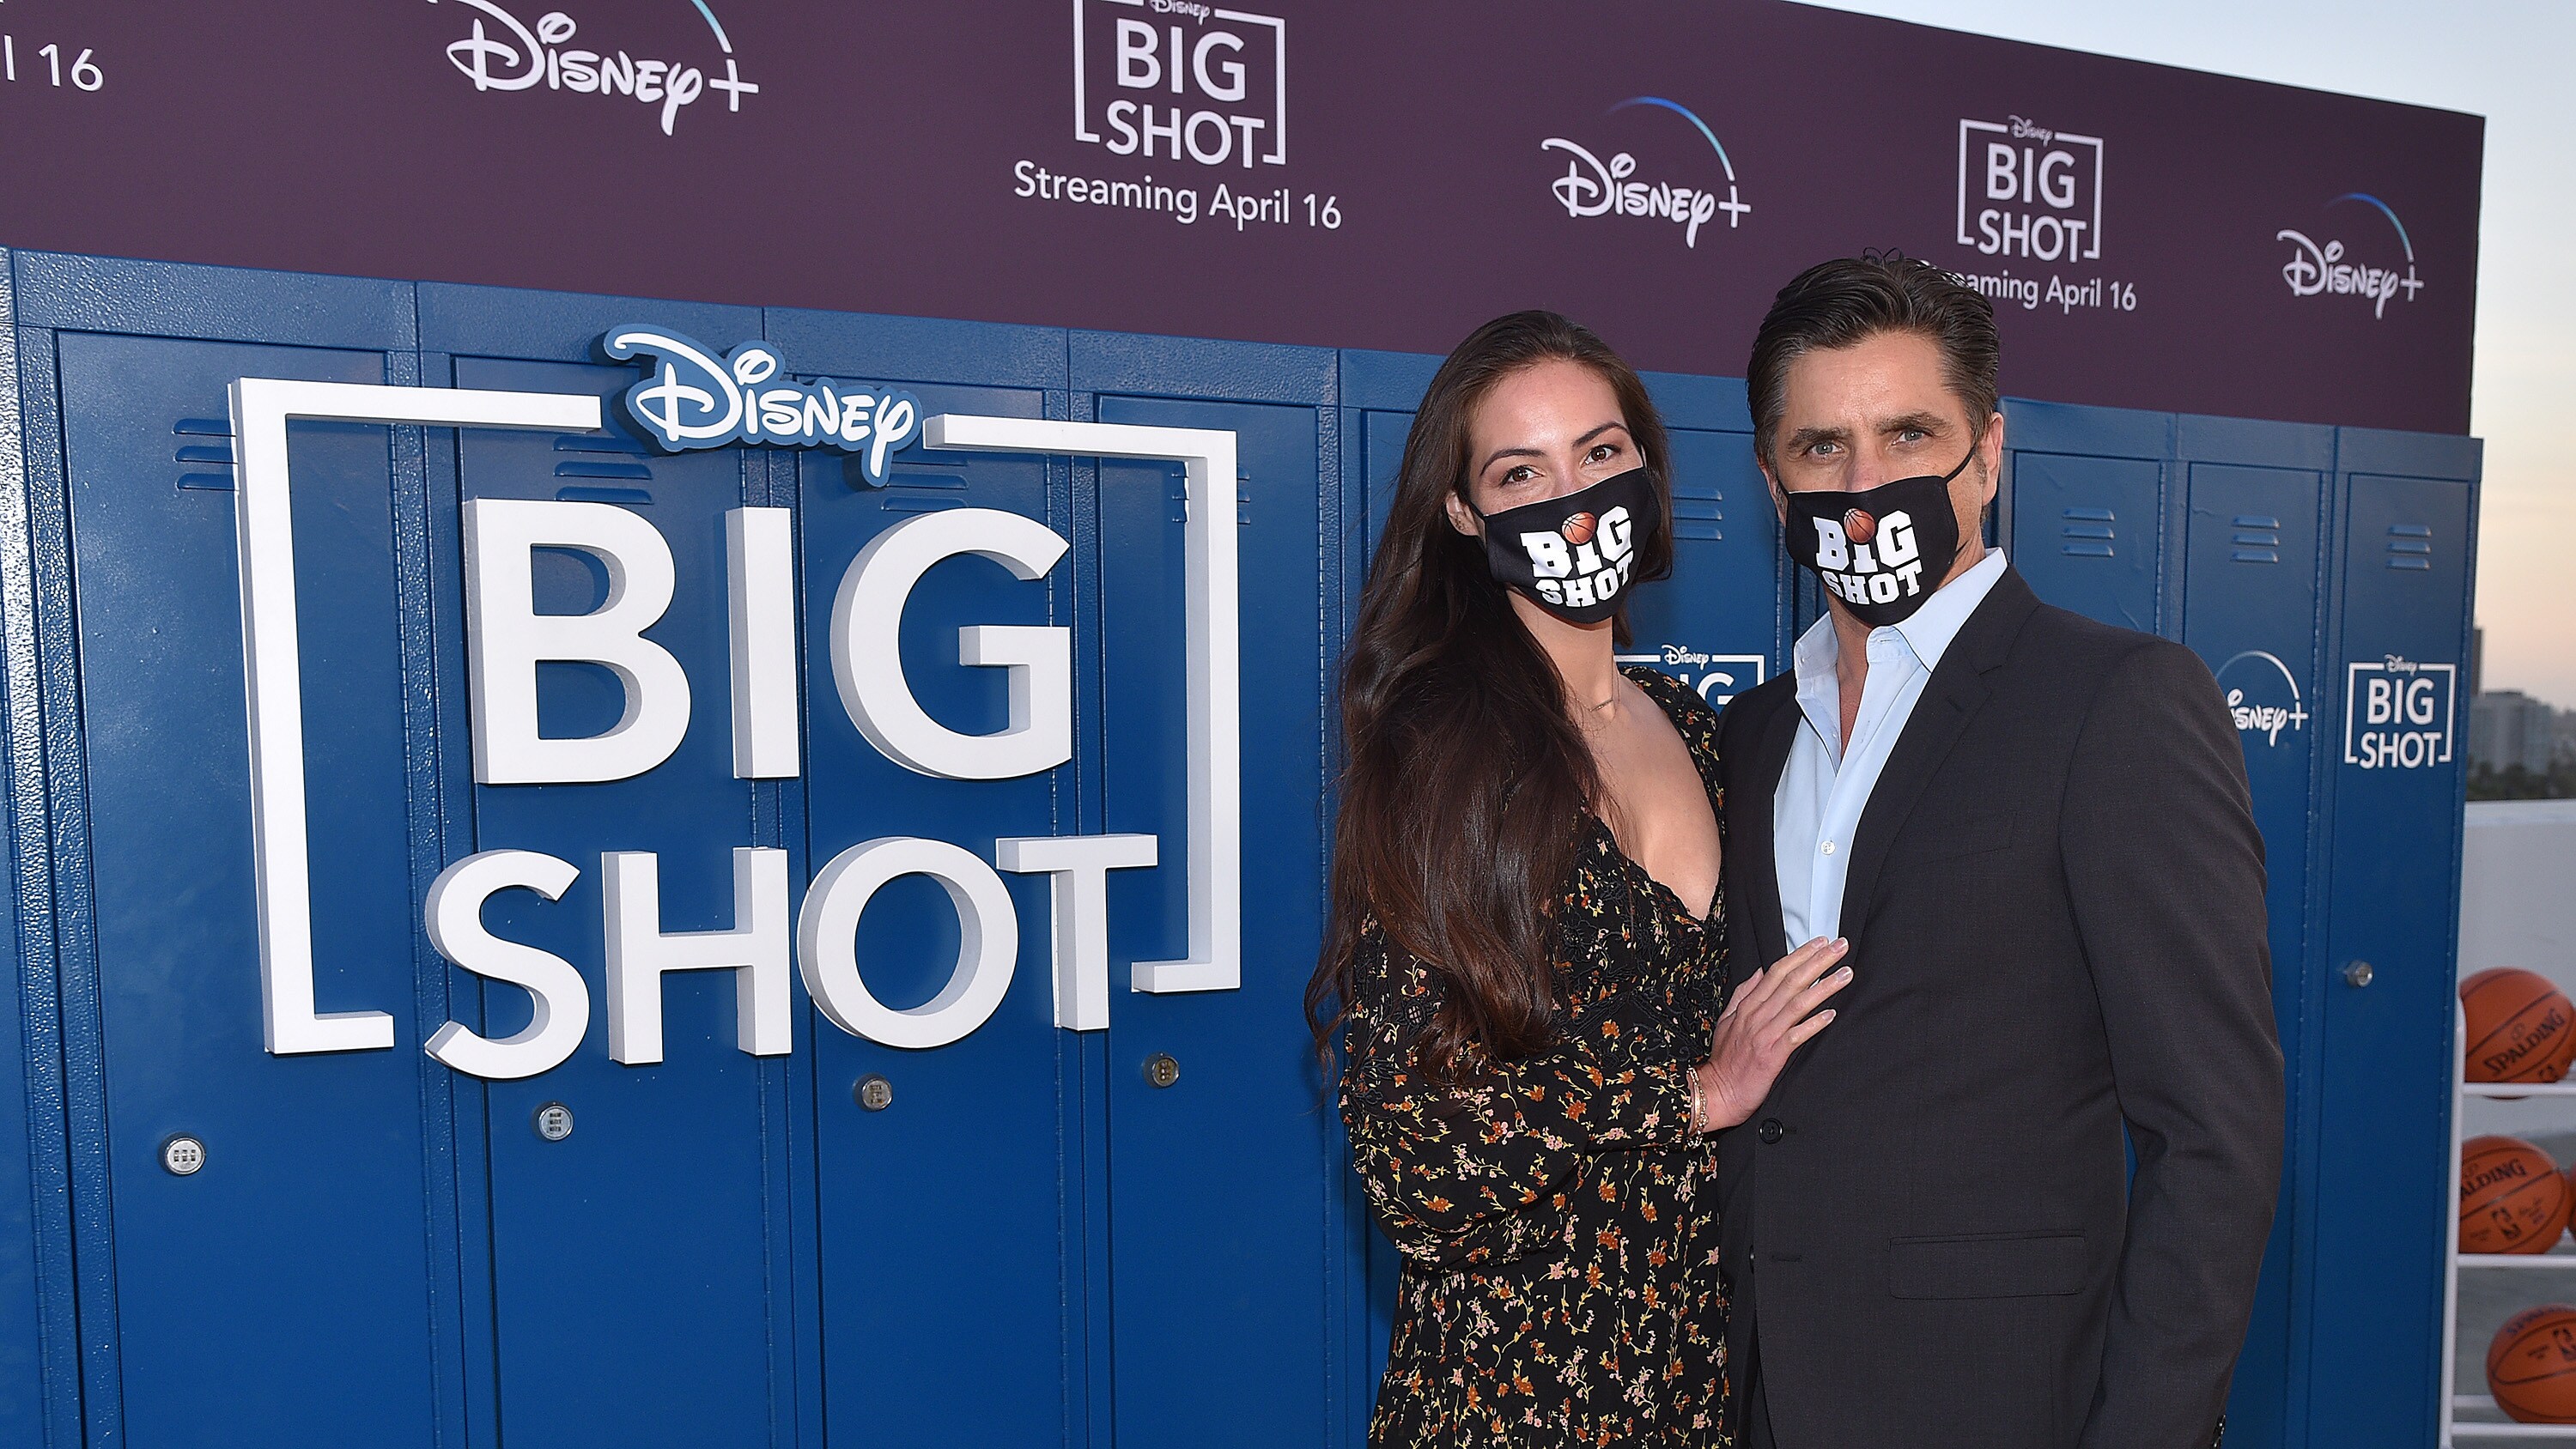 LOS ANGELES, CA - APRIL 14: Caitlin McHugh and John Stamos attend the world premiere drive-in screening of the Disney + original series “BIG SHOT” at The Grove in Los Angeles, California on April 14, 2021. (Photo by Stewart Cook/Disney +/PictureGroup)